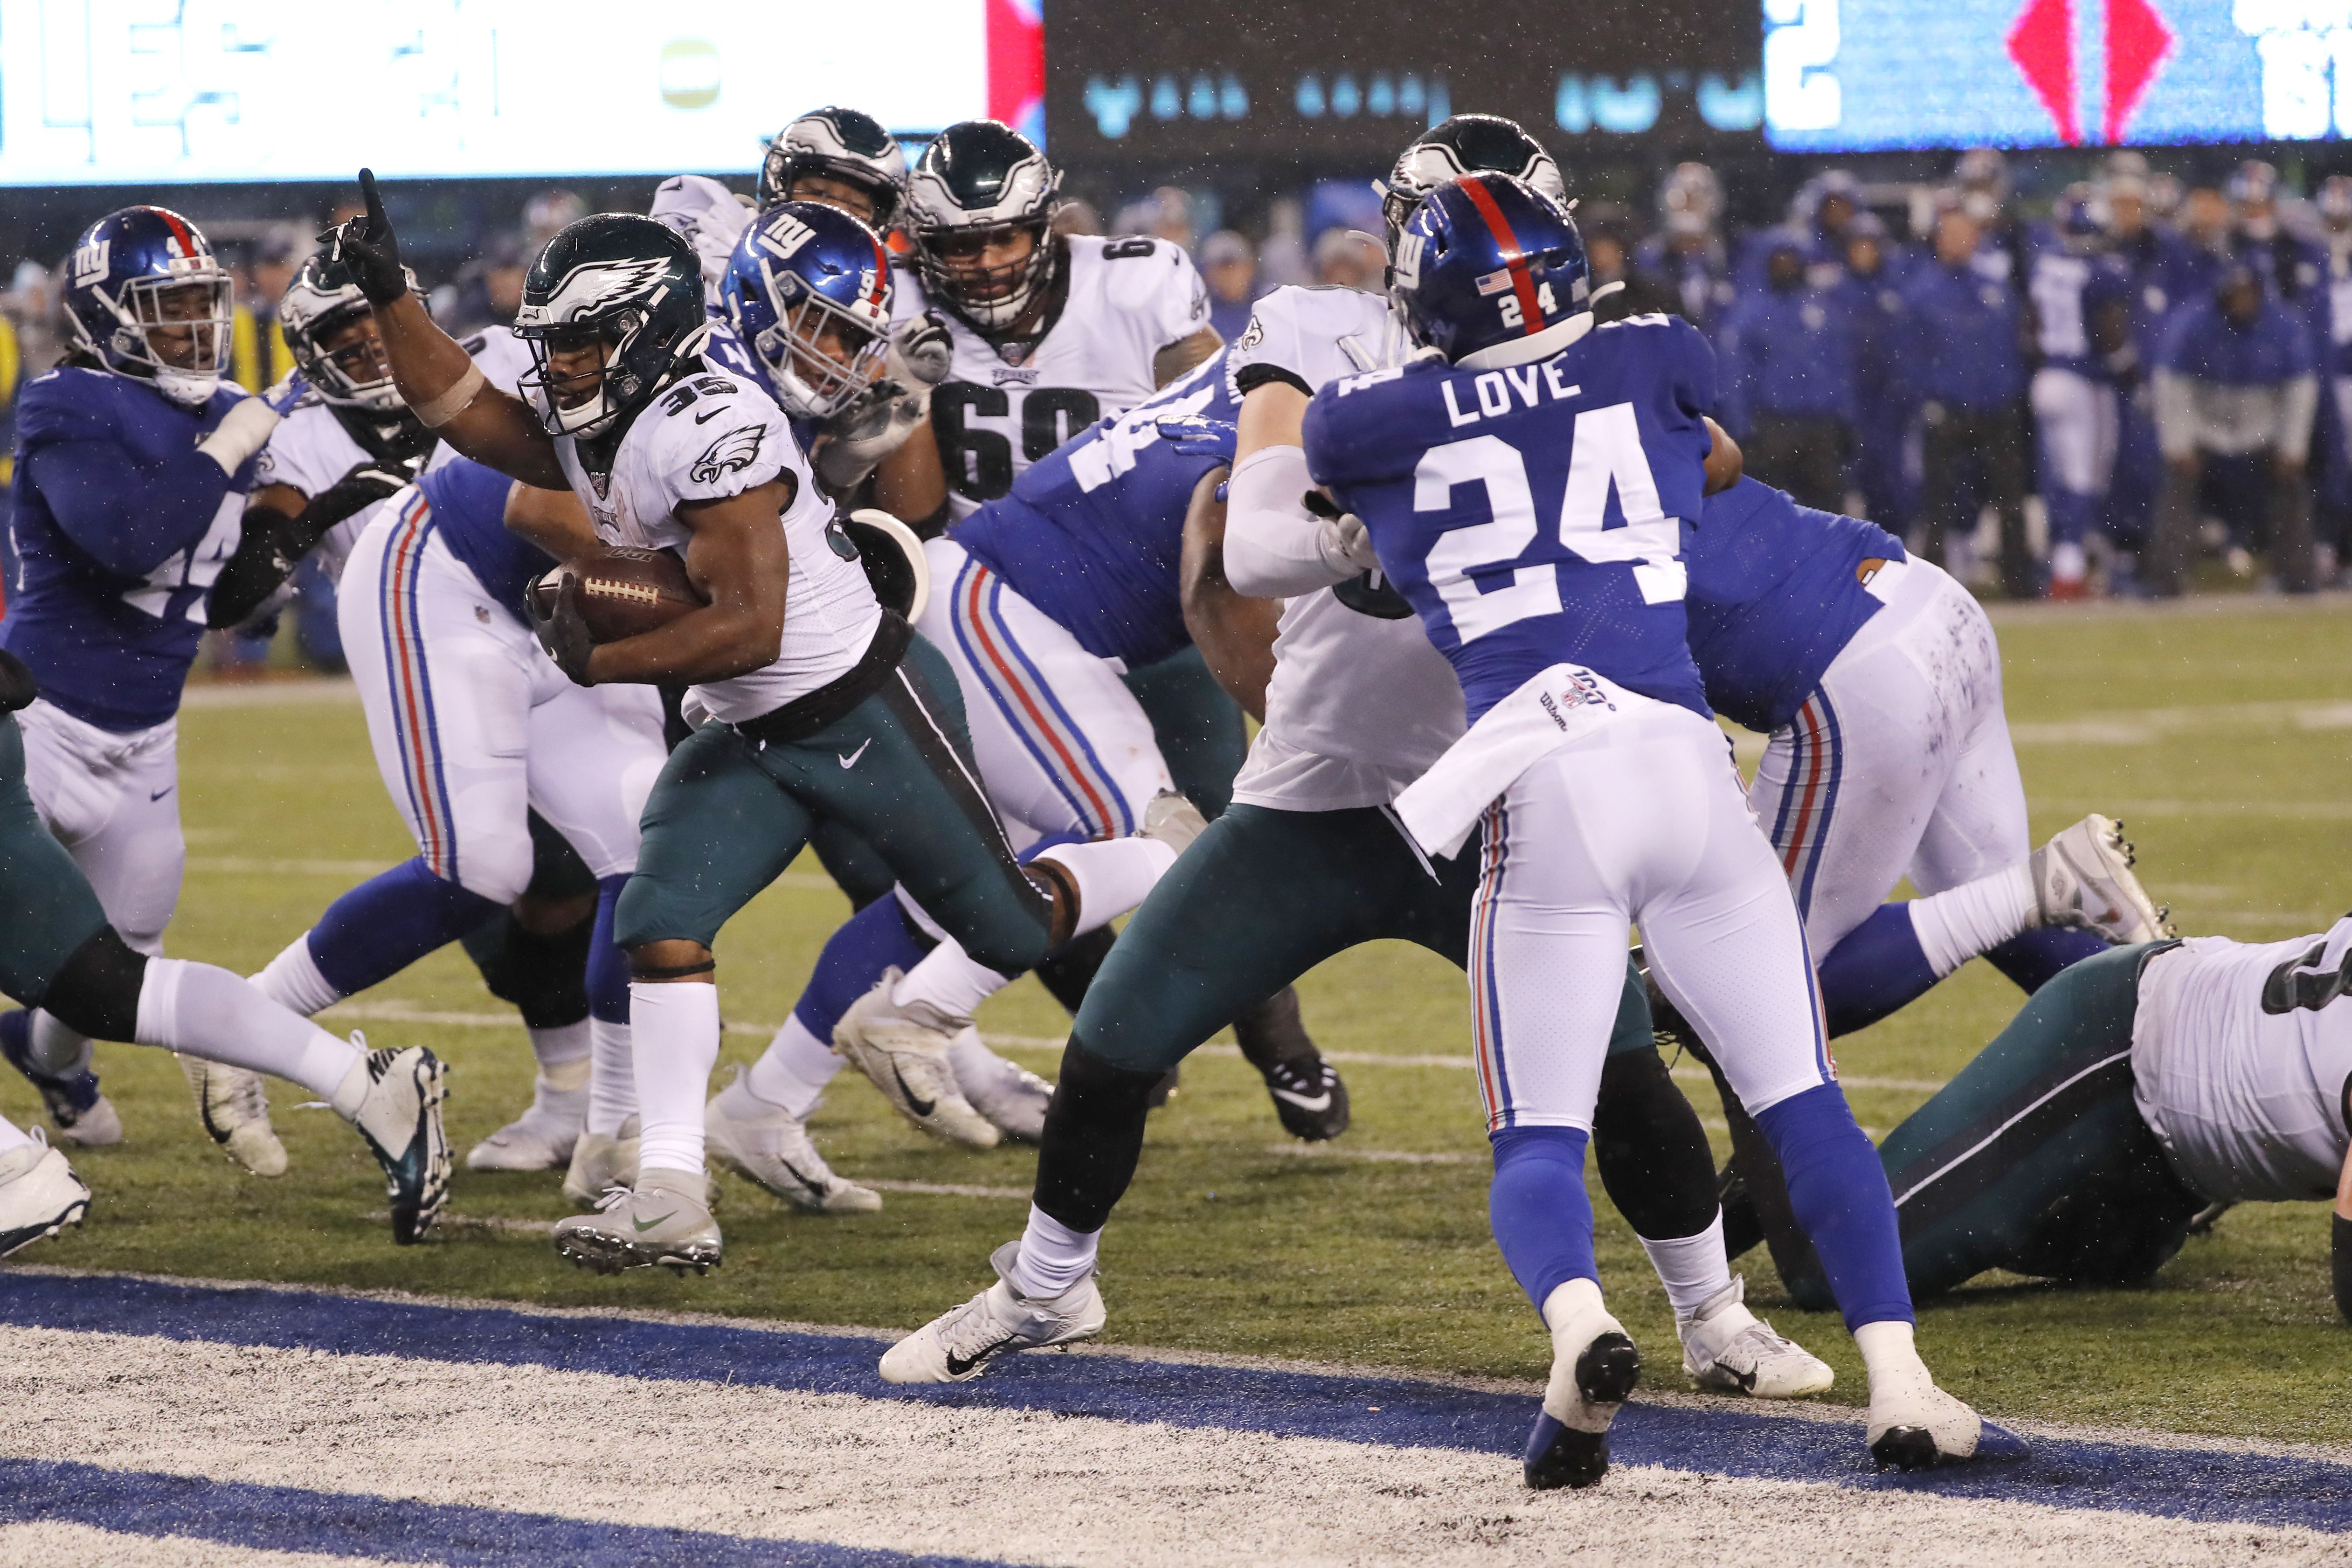 Eagles rally to beat Giants in overtime, 23-17